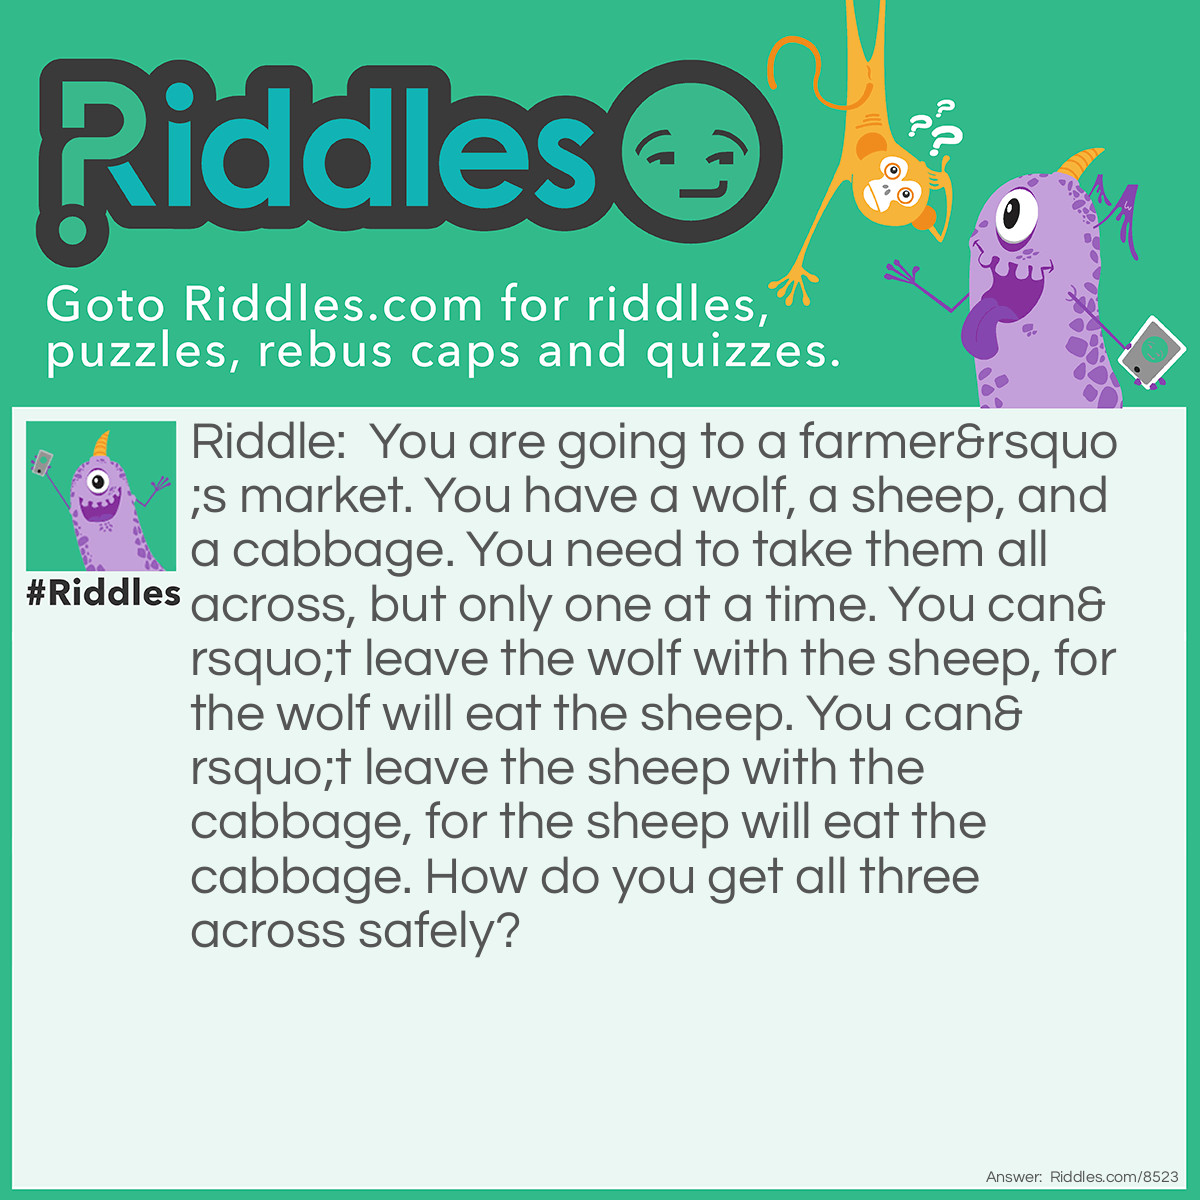 Riddle: You are going to a farmer's market. You have a wolf, a sheep, and a cabbage. You need to take them all across, but only one at a time. You can't leave the wolf with the sheep, for the wolf will eat the sheep. You can't leave the sheep with the cabbage, for the sheep will eat the cabbage. How do you get all three across safely? Answer: You take the sheep across first. Then you go back, and take the cabbage across. Then, on the way back, you take the sheep back. Then you take the wolf across. Finally, you take the sheep back across, and you continue on to the market, all unharmed.